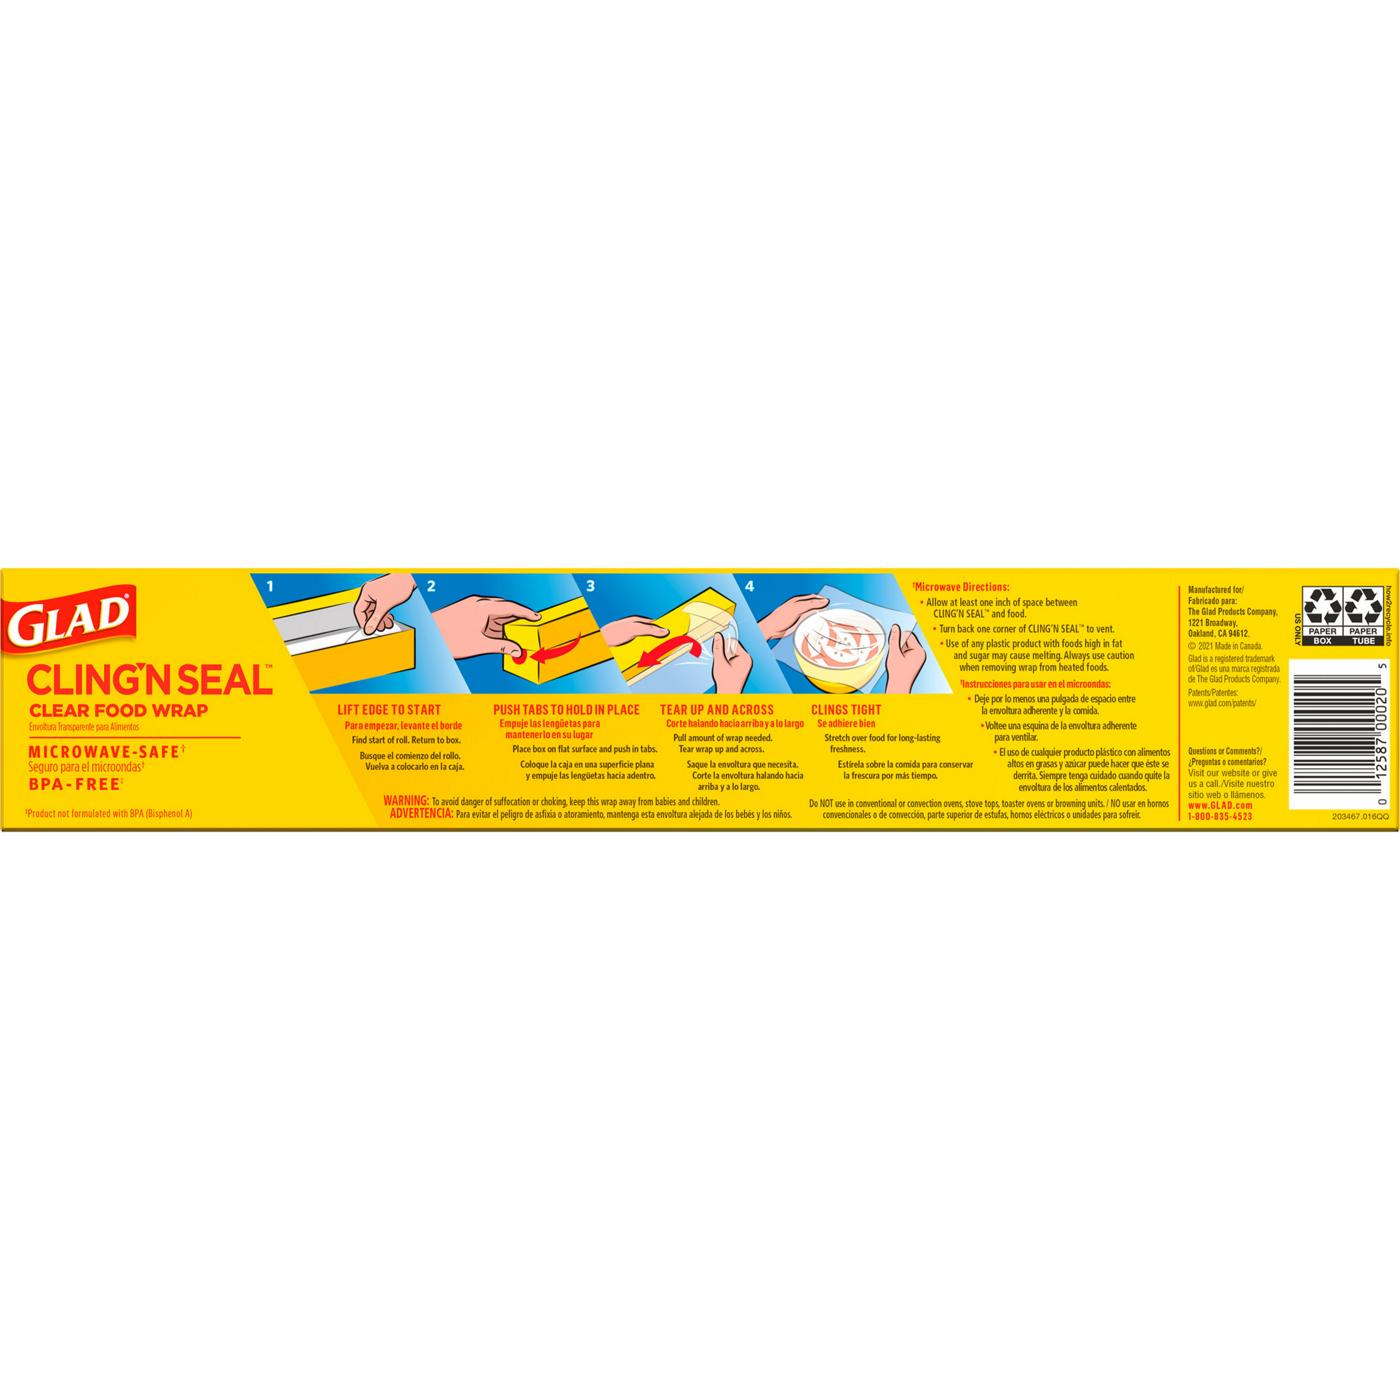 Glad Cling 'N Seal Clear Plastic Wrap; image 6 of 6